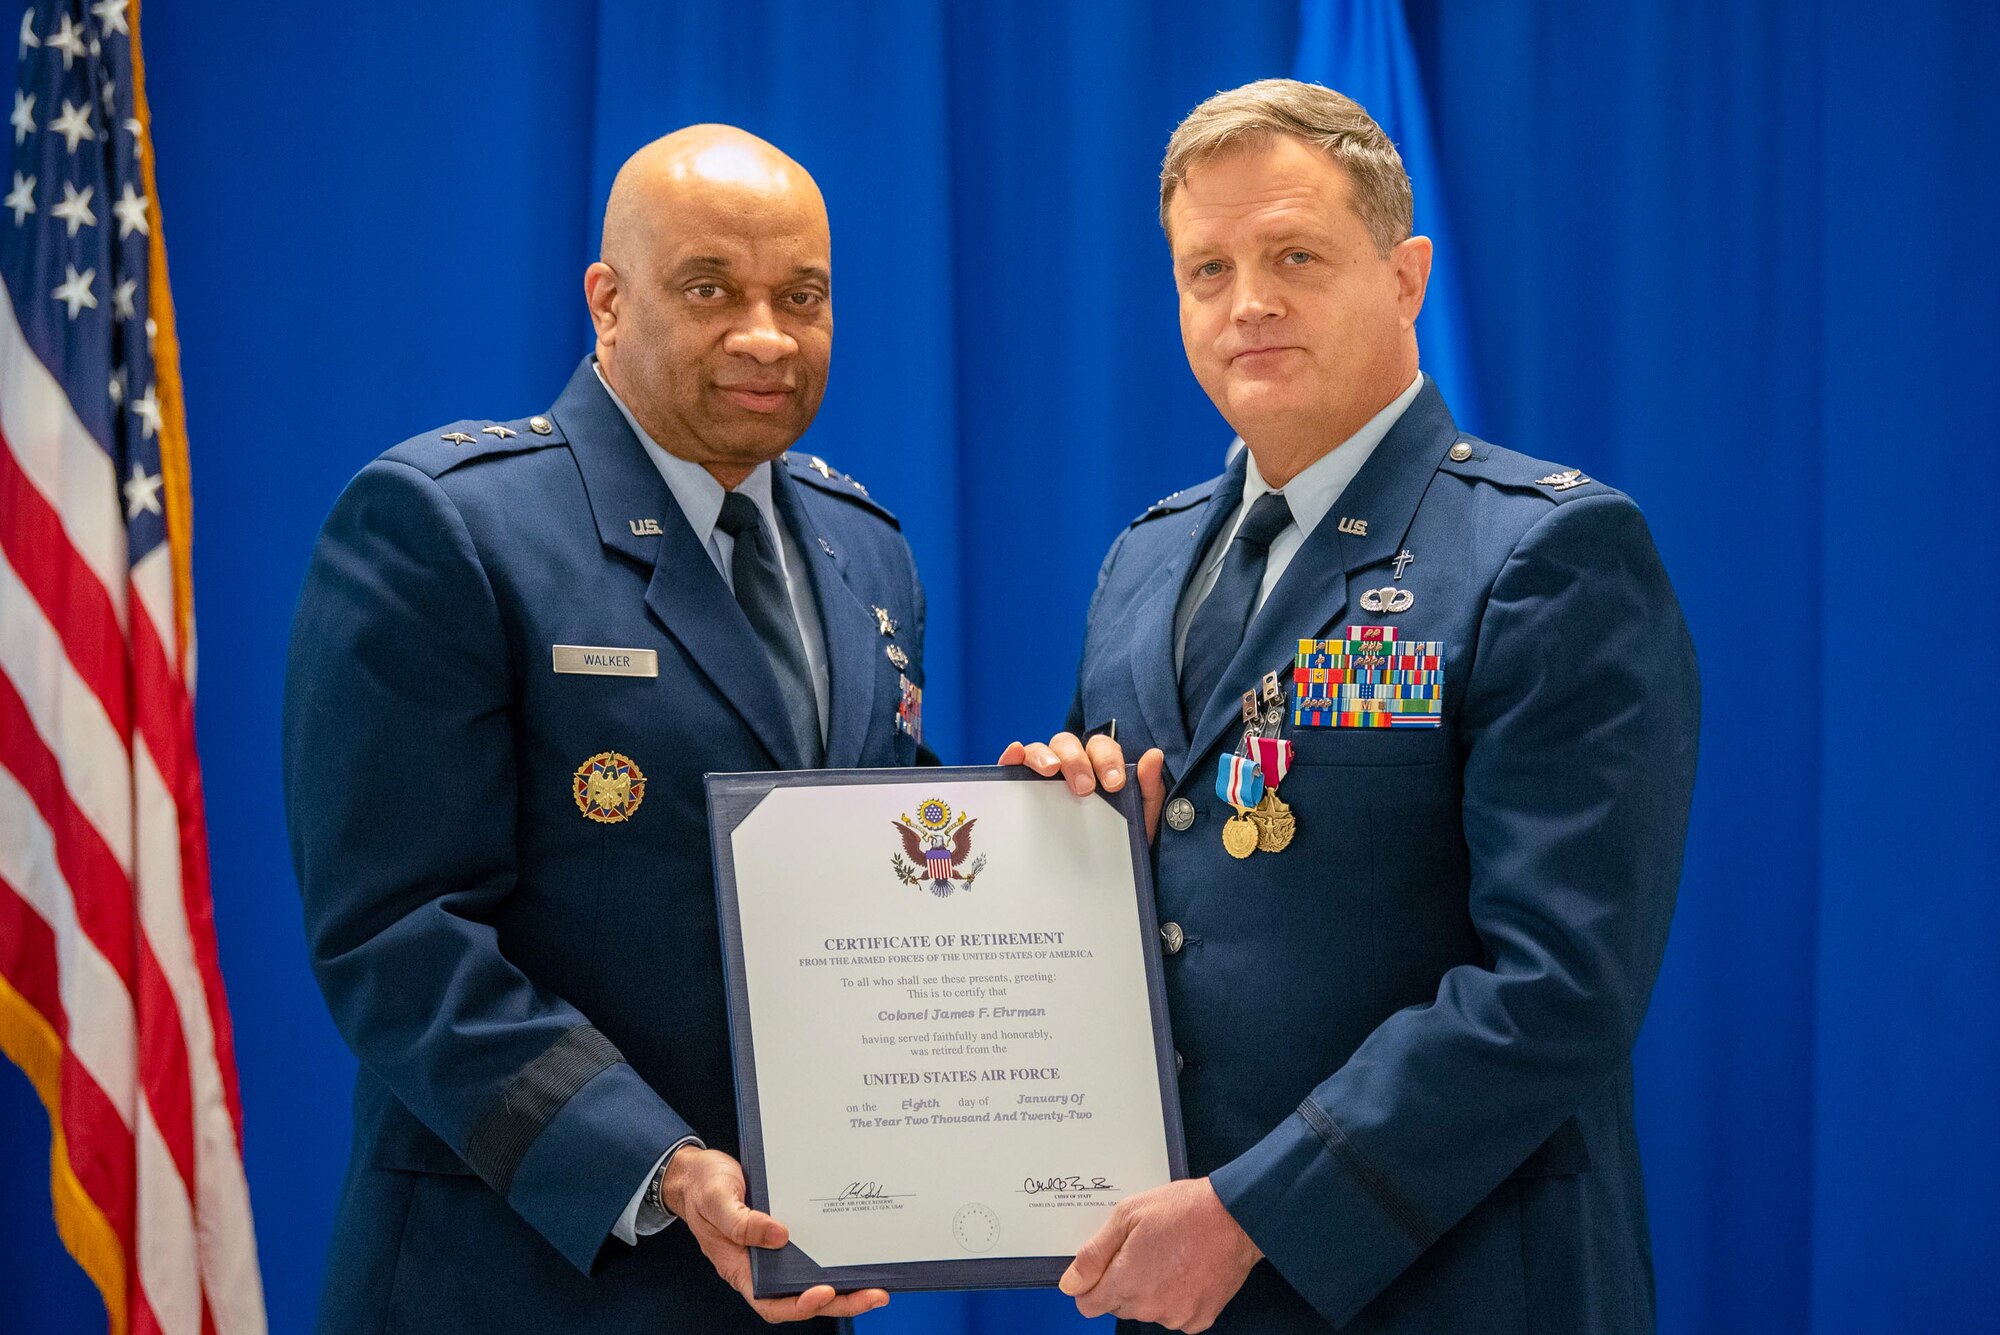 Col. Fred Ehrman, right, assistant to the command chaplain at United States Air Forces Europe and Air Forces Africa, receives his certificate of retirement from Maj. Gen. Charles Walker, director of the Office of Complex Investigations at the National Guard Bureau, during a ceremony at the Kentucky Air National Guard Base in Louisville, Ky., March 13, 2022. Ehrman served as a chaplain at the Kentucky Air National Guard’s 123rd Airlift Wing for 16 years. (U.S. Air National Guard photo by Phil Speck)